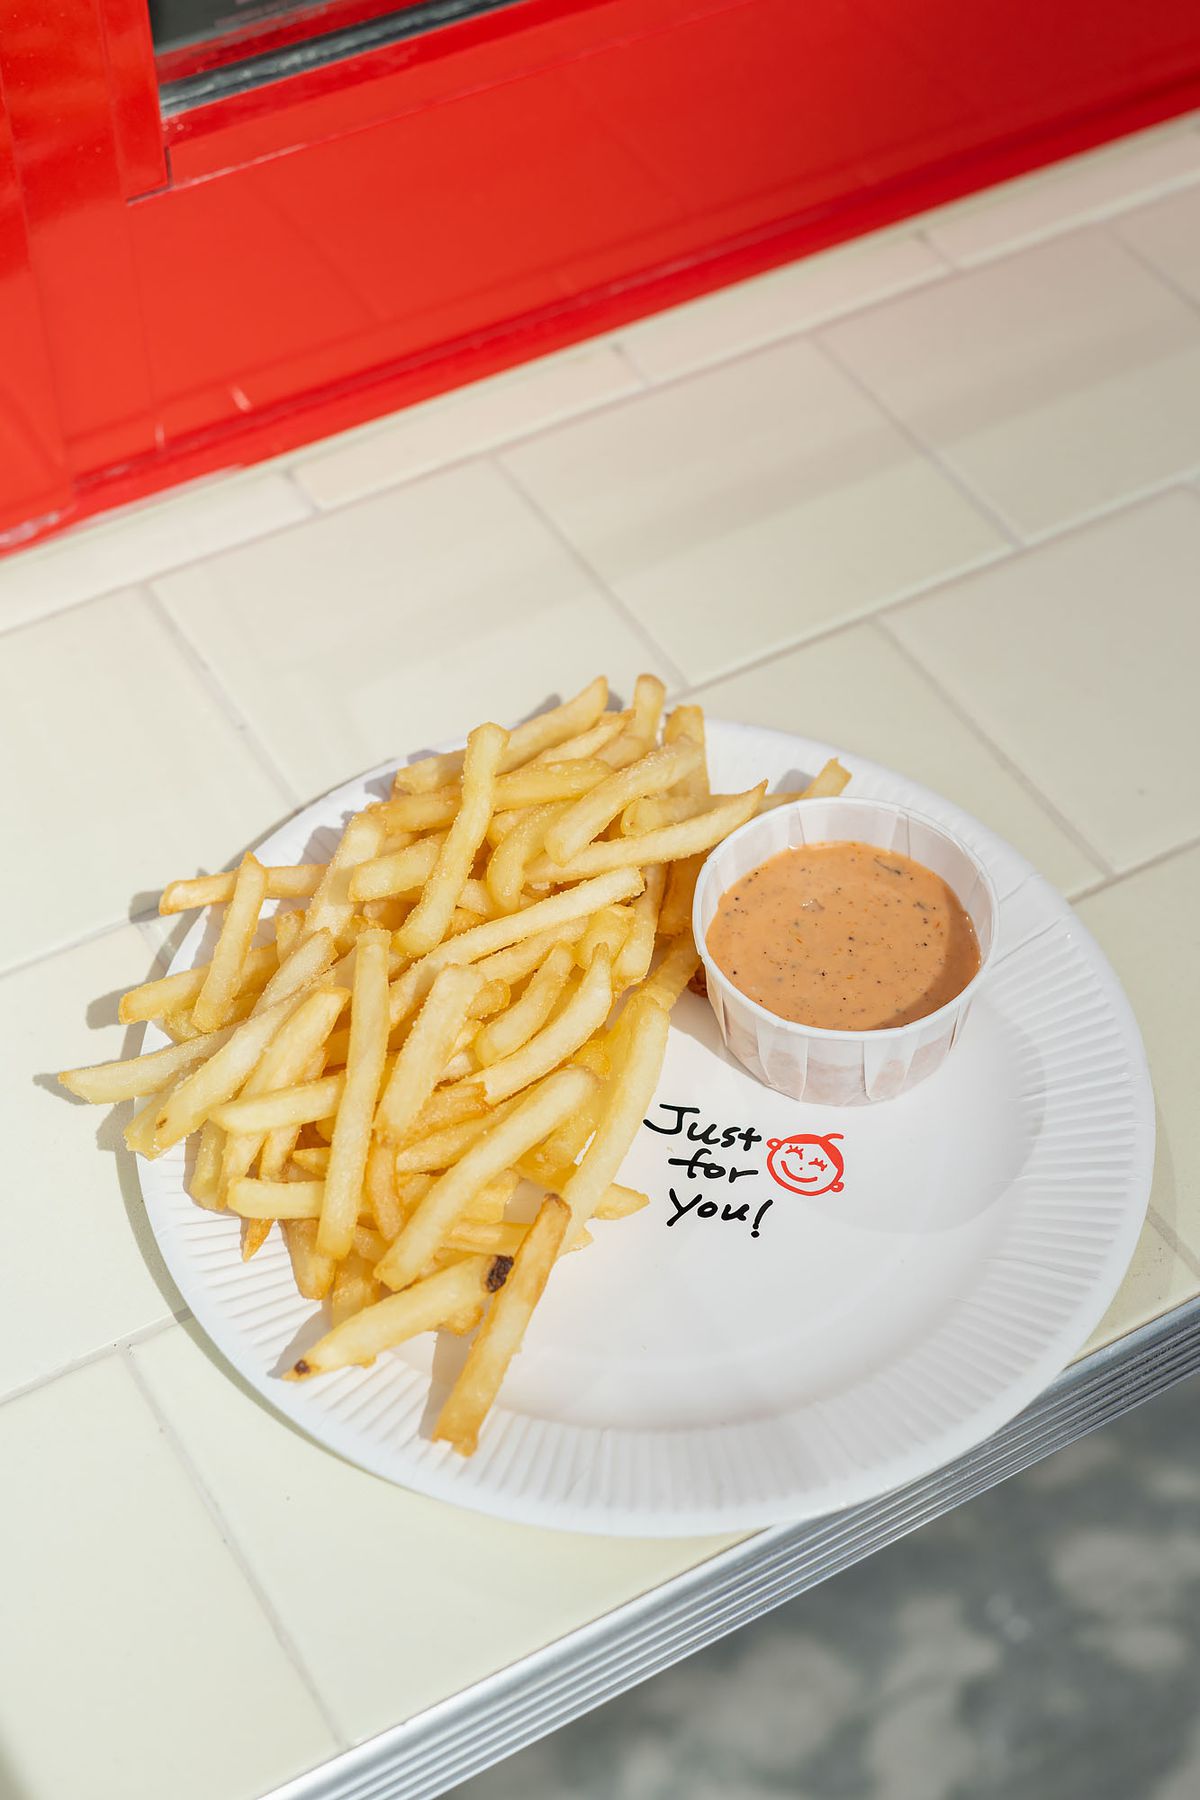 A pile of fries and a cup of orange sauce on a white paper plate.